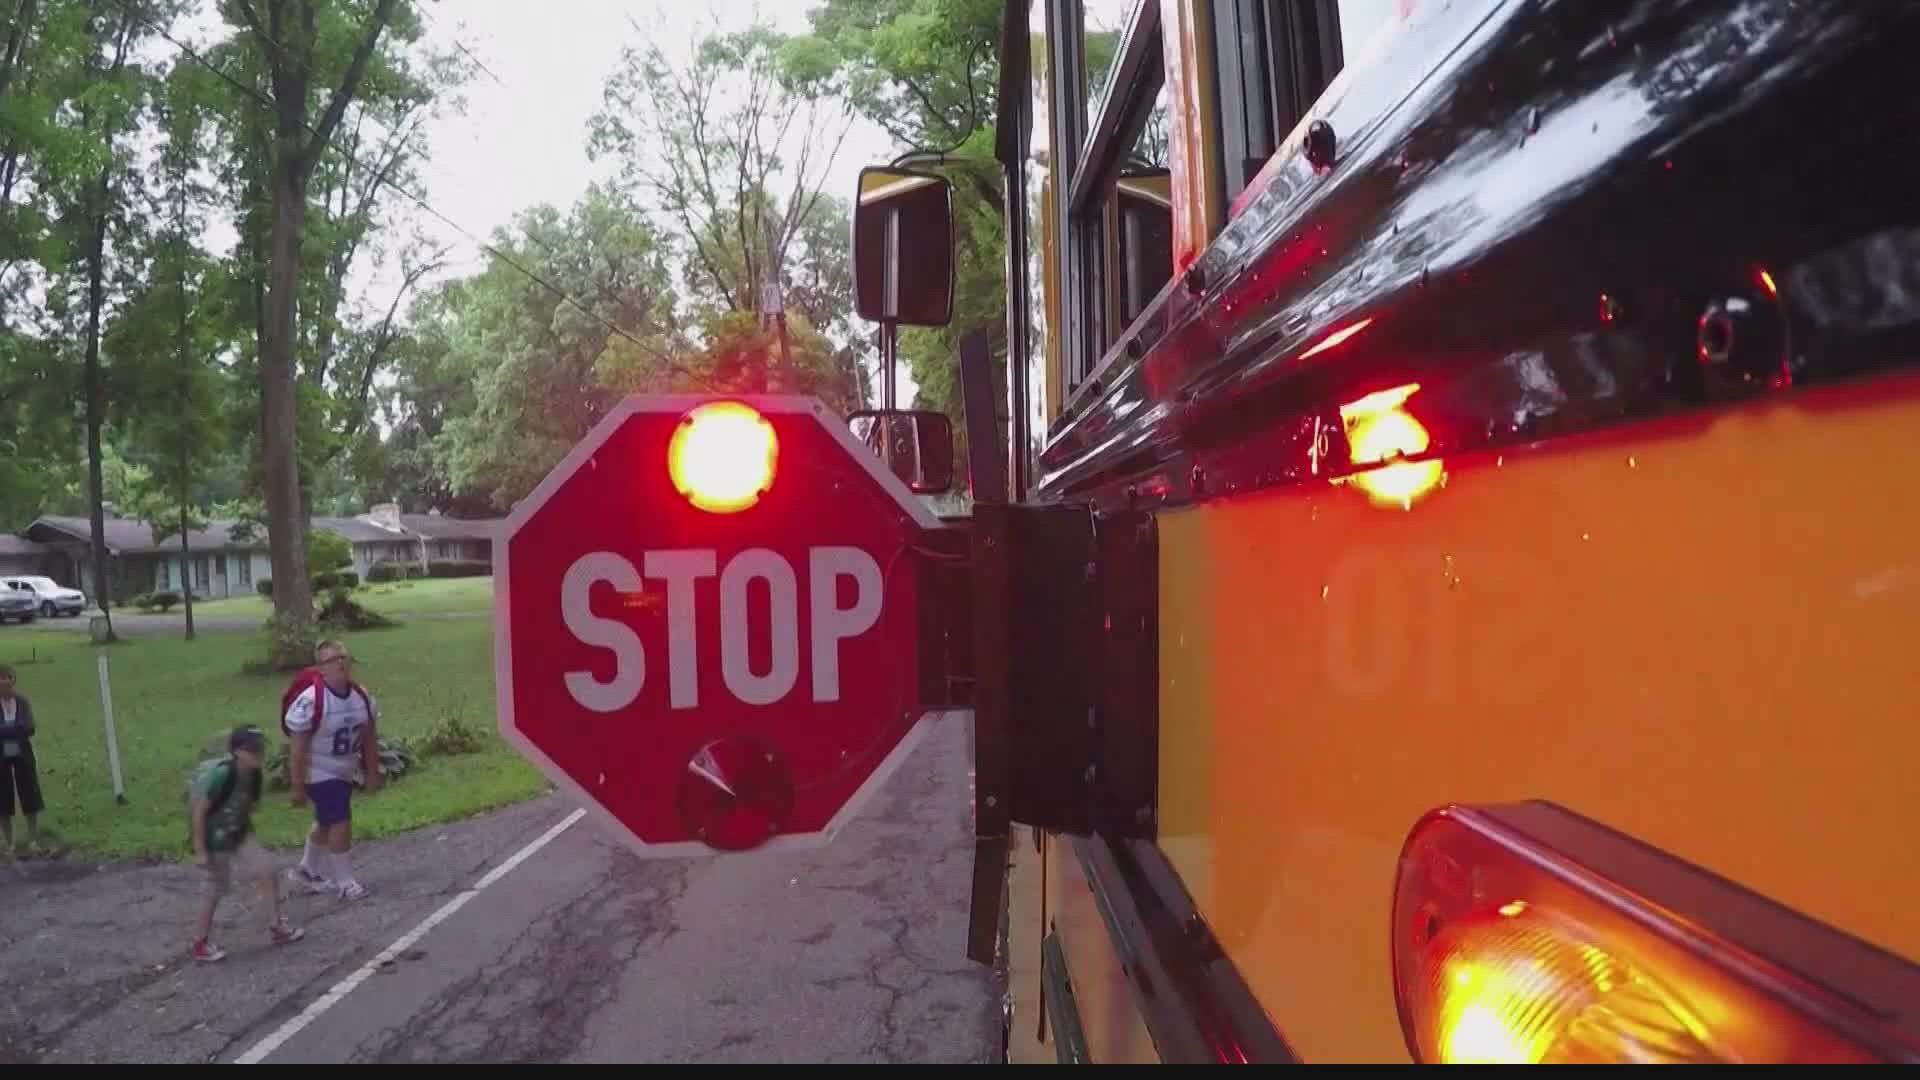 What are the rules of the road when it comes to school buses?